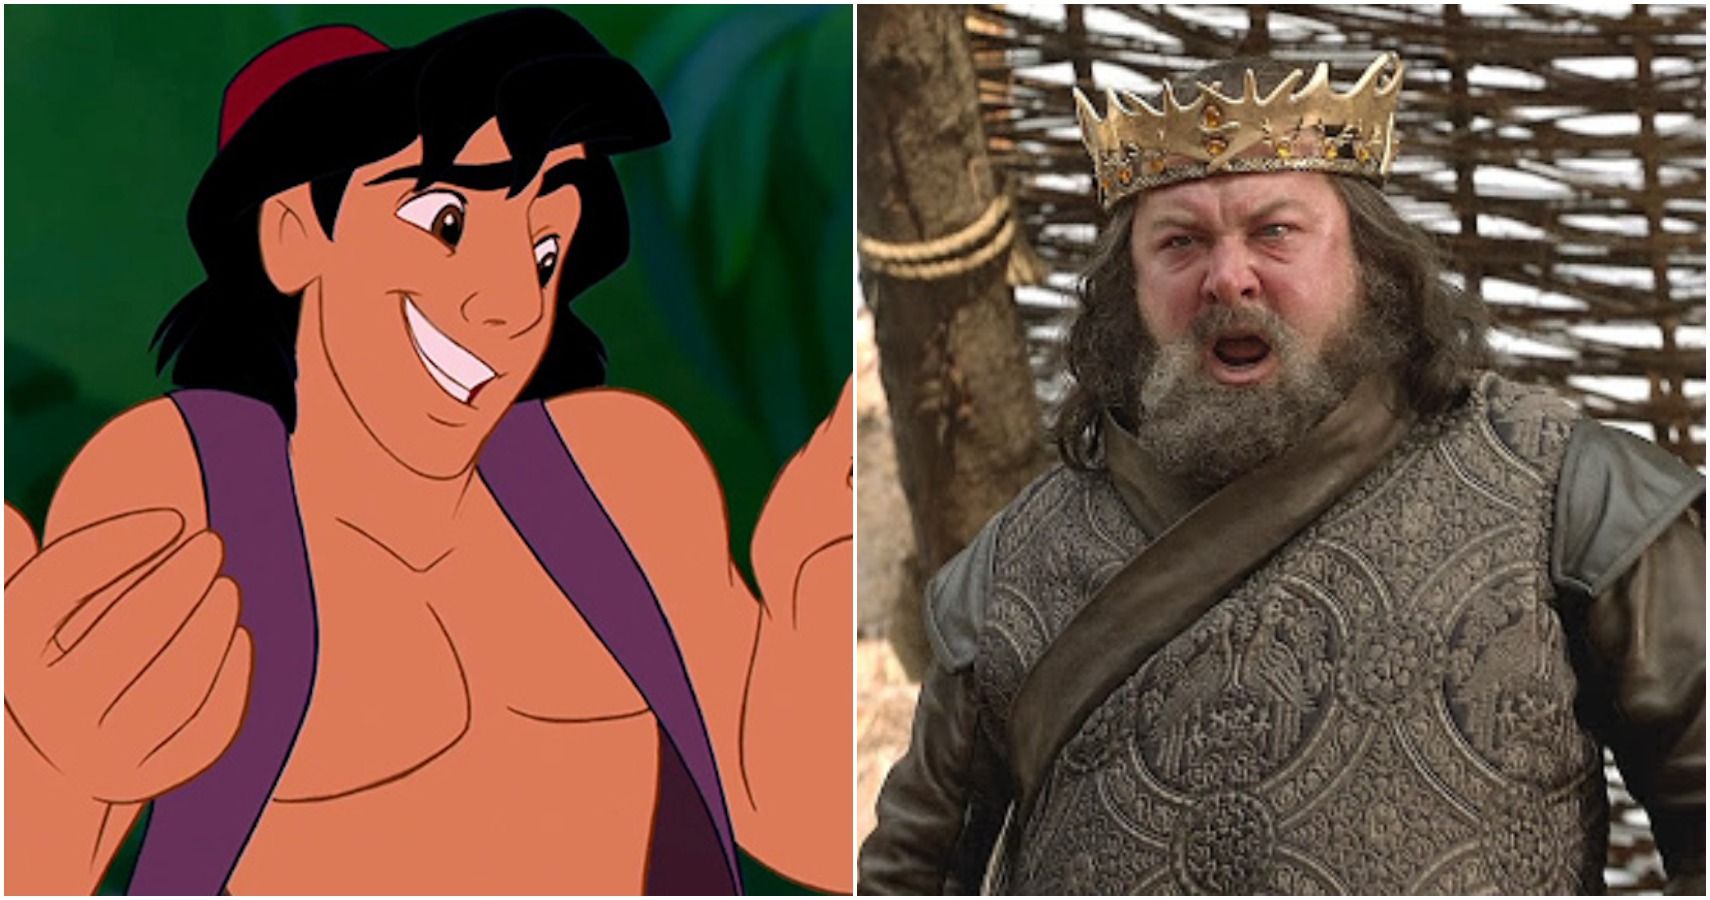 10 Disney Princes Sorted Into Their Game Of Thrones Houses